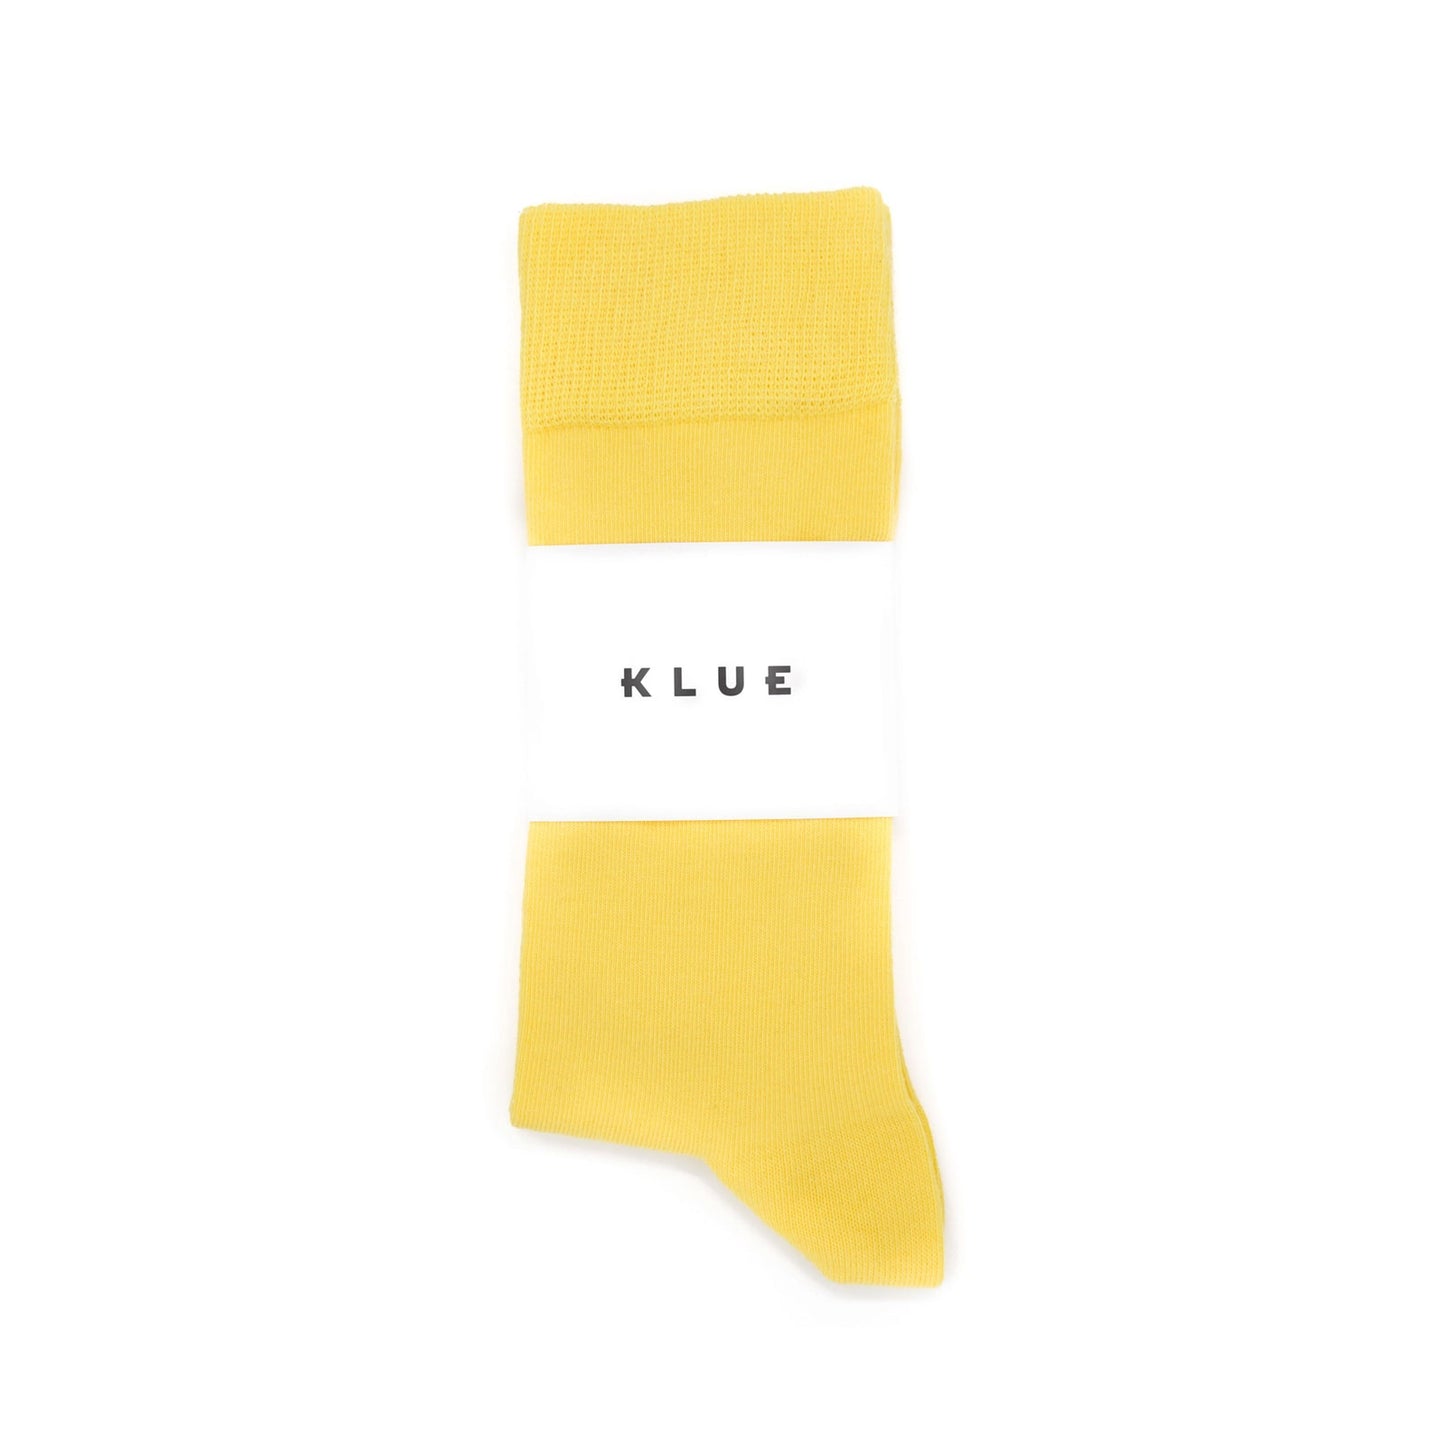 Klue Solid Socks in Yellow